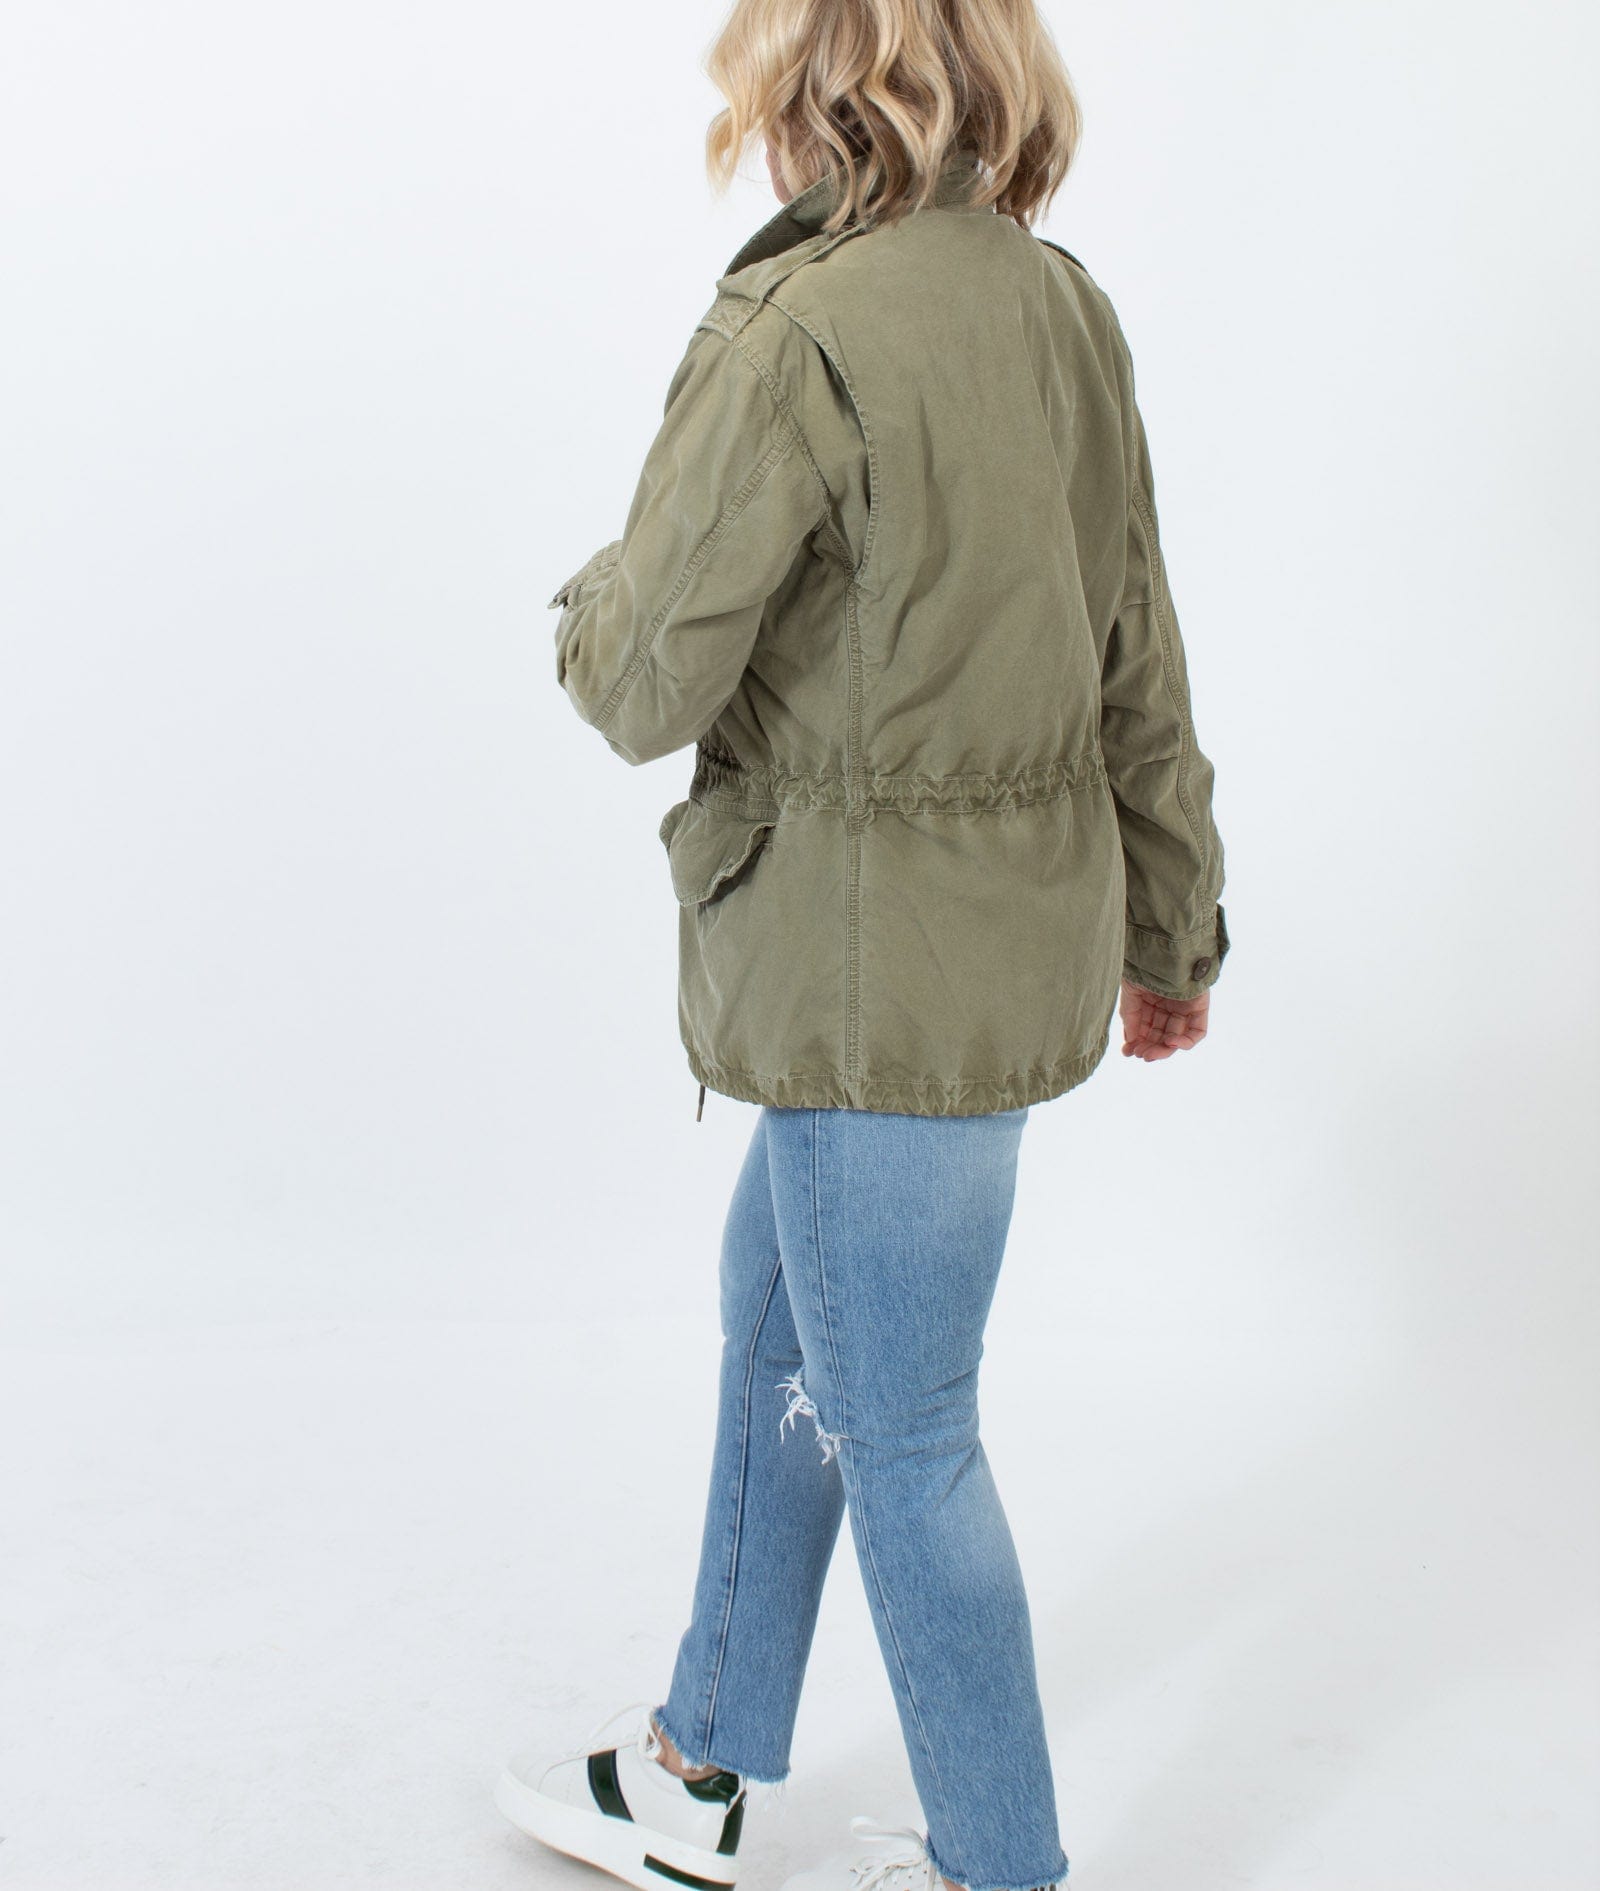 Women's Twill Military Jacket by Polo Ralph Lauren